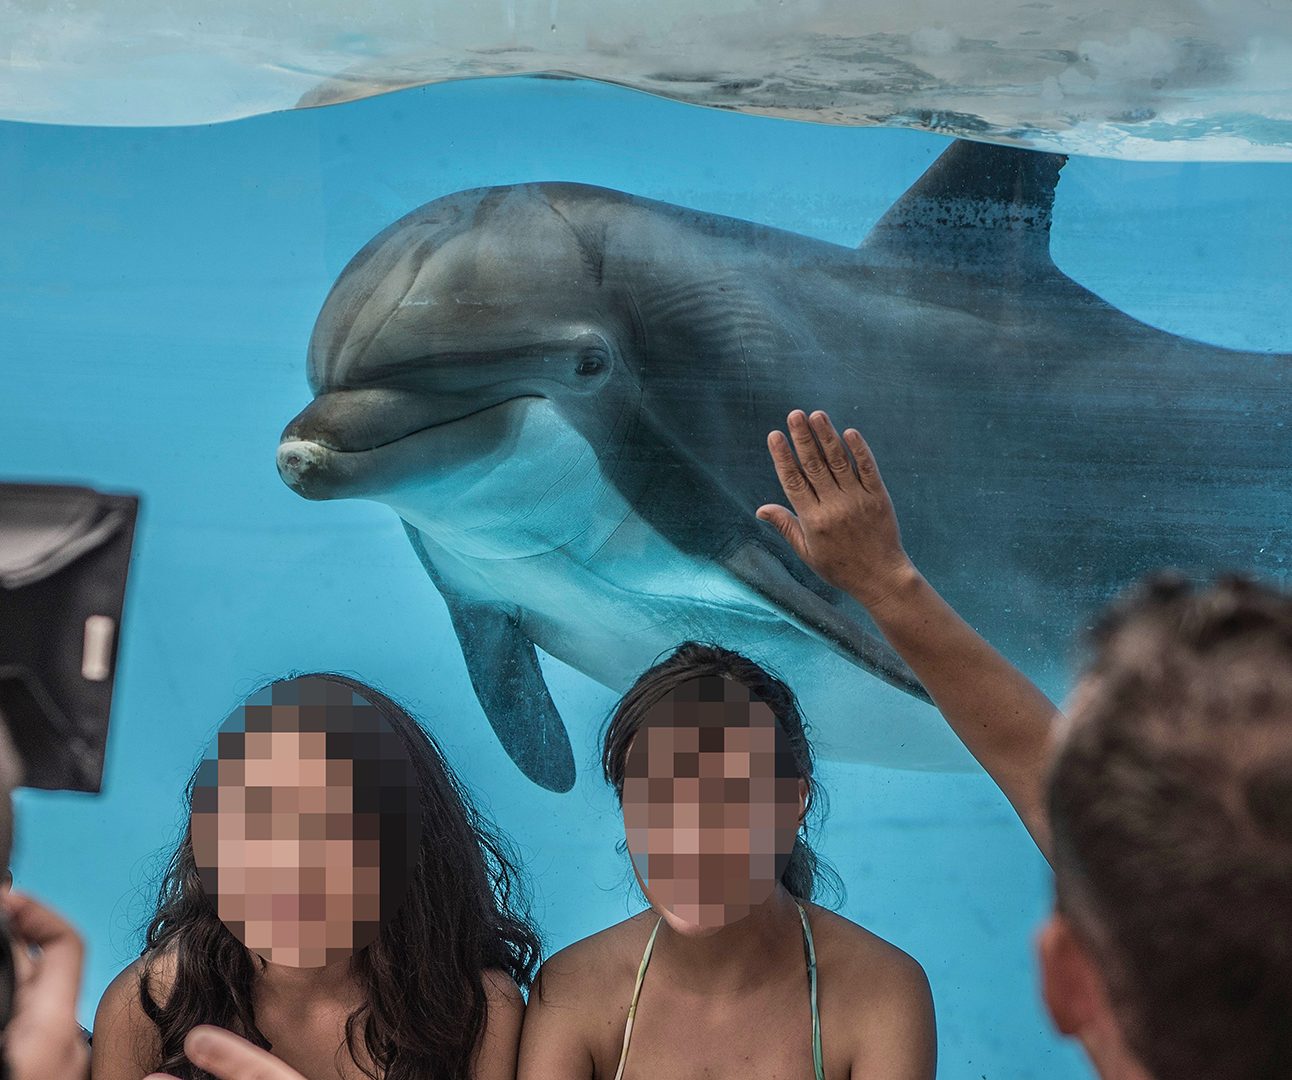 People pose for a photo in front of a dolphin inside a glass tank